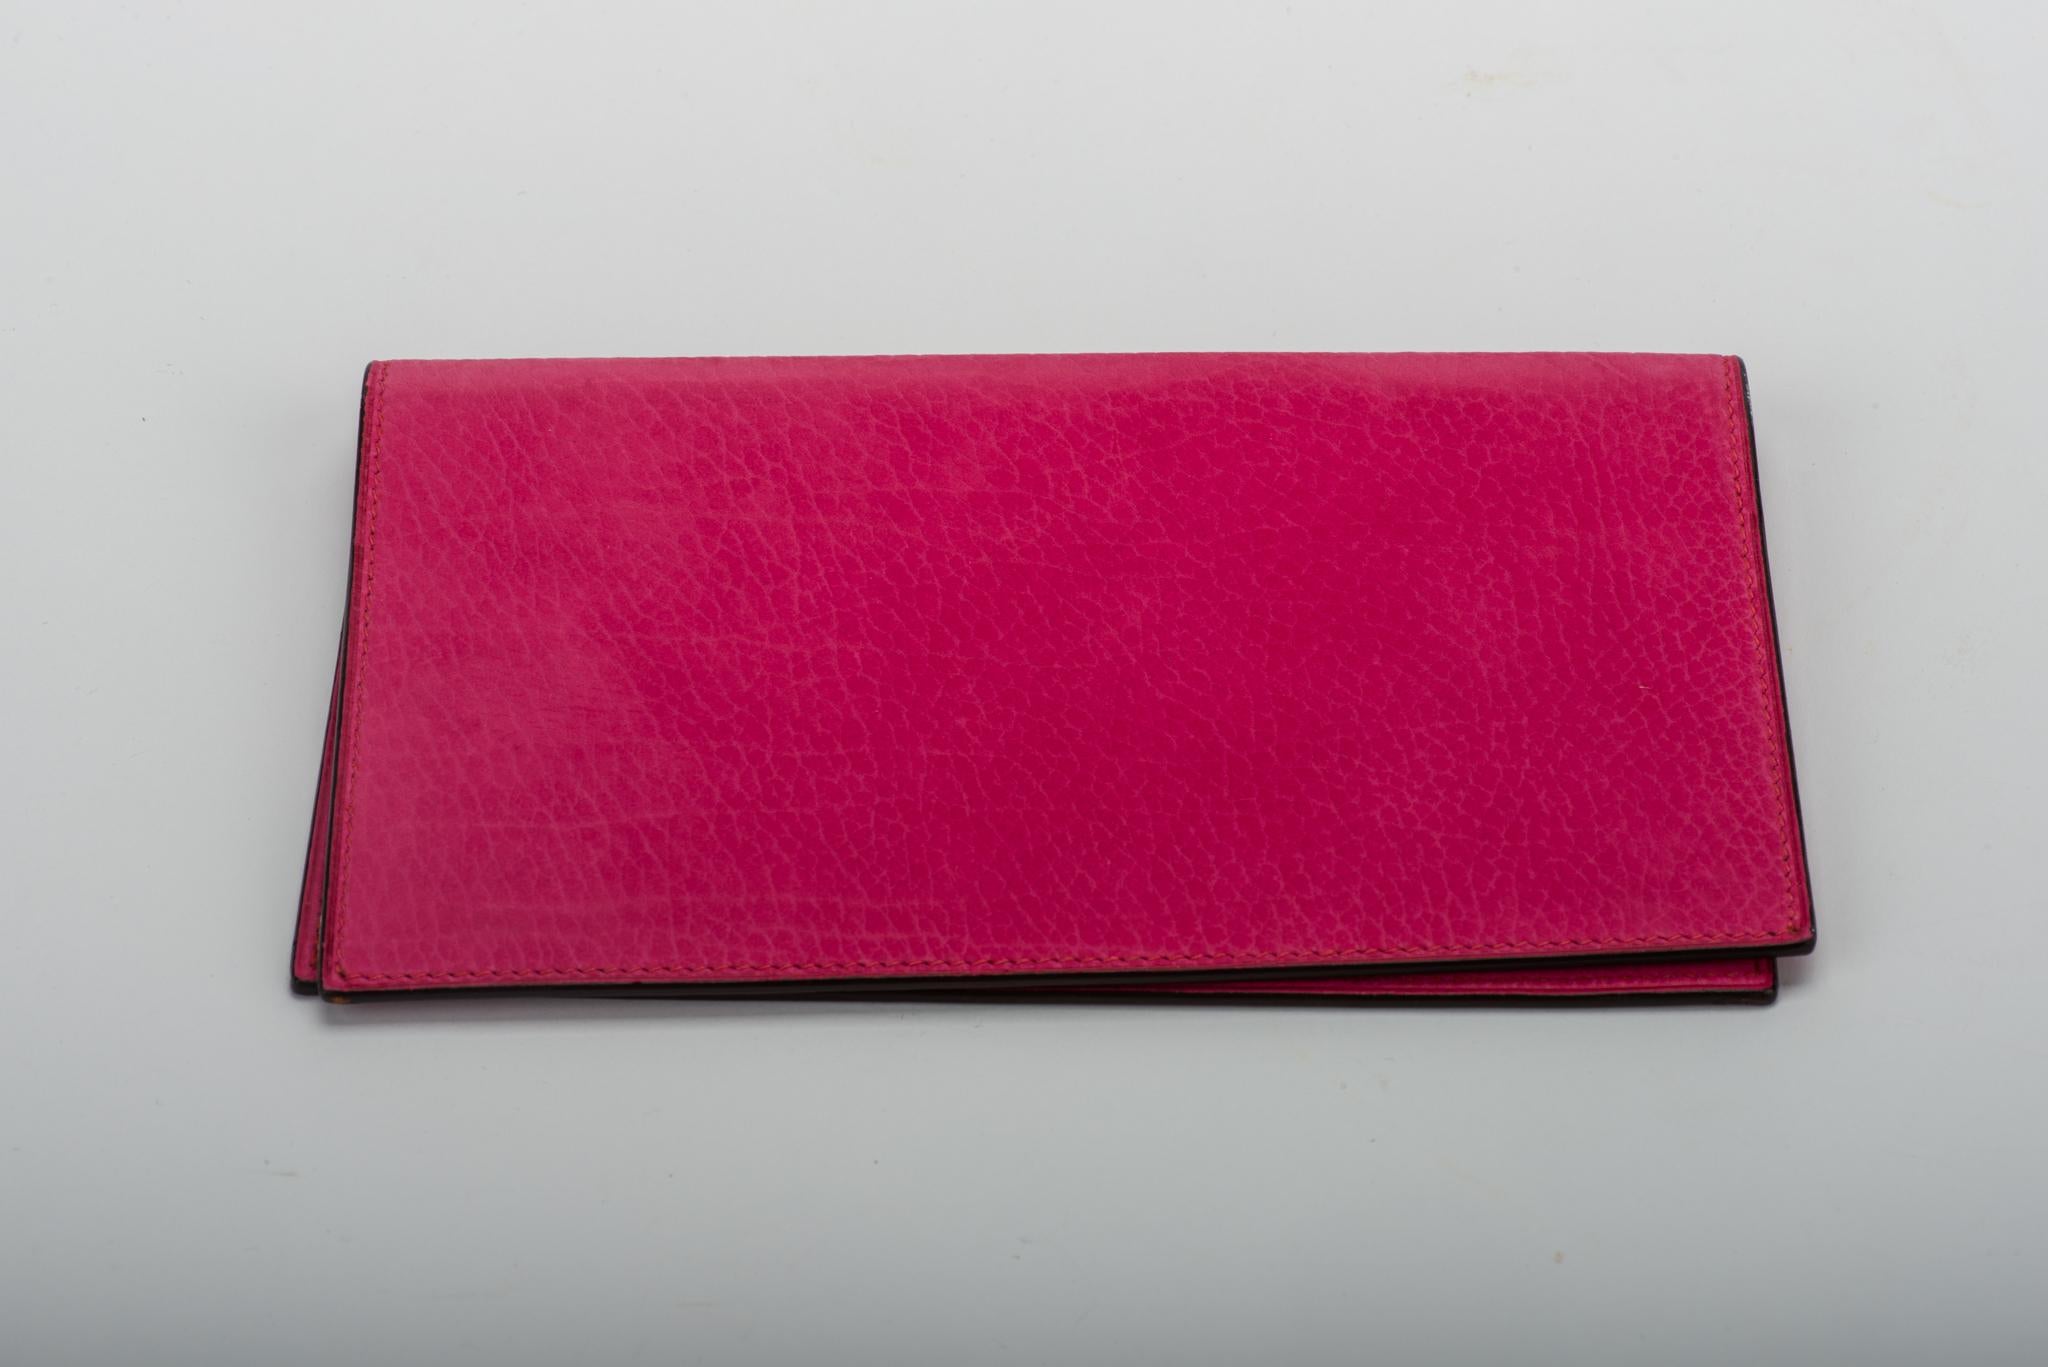 Hermès hot pink suede checkbook cover. Never used in original box, date stamp I for 2005. Minor fading throughout the outside. Stamped S for sale.